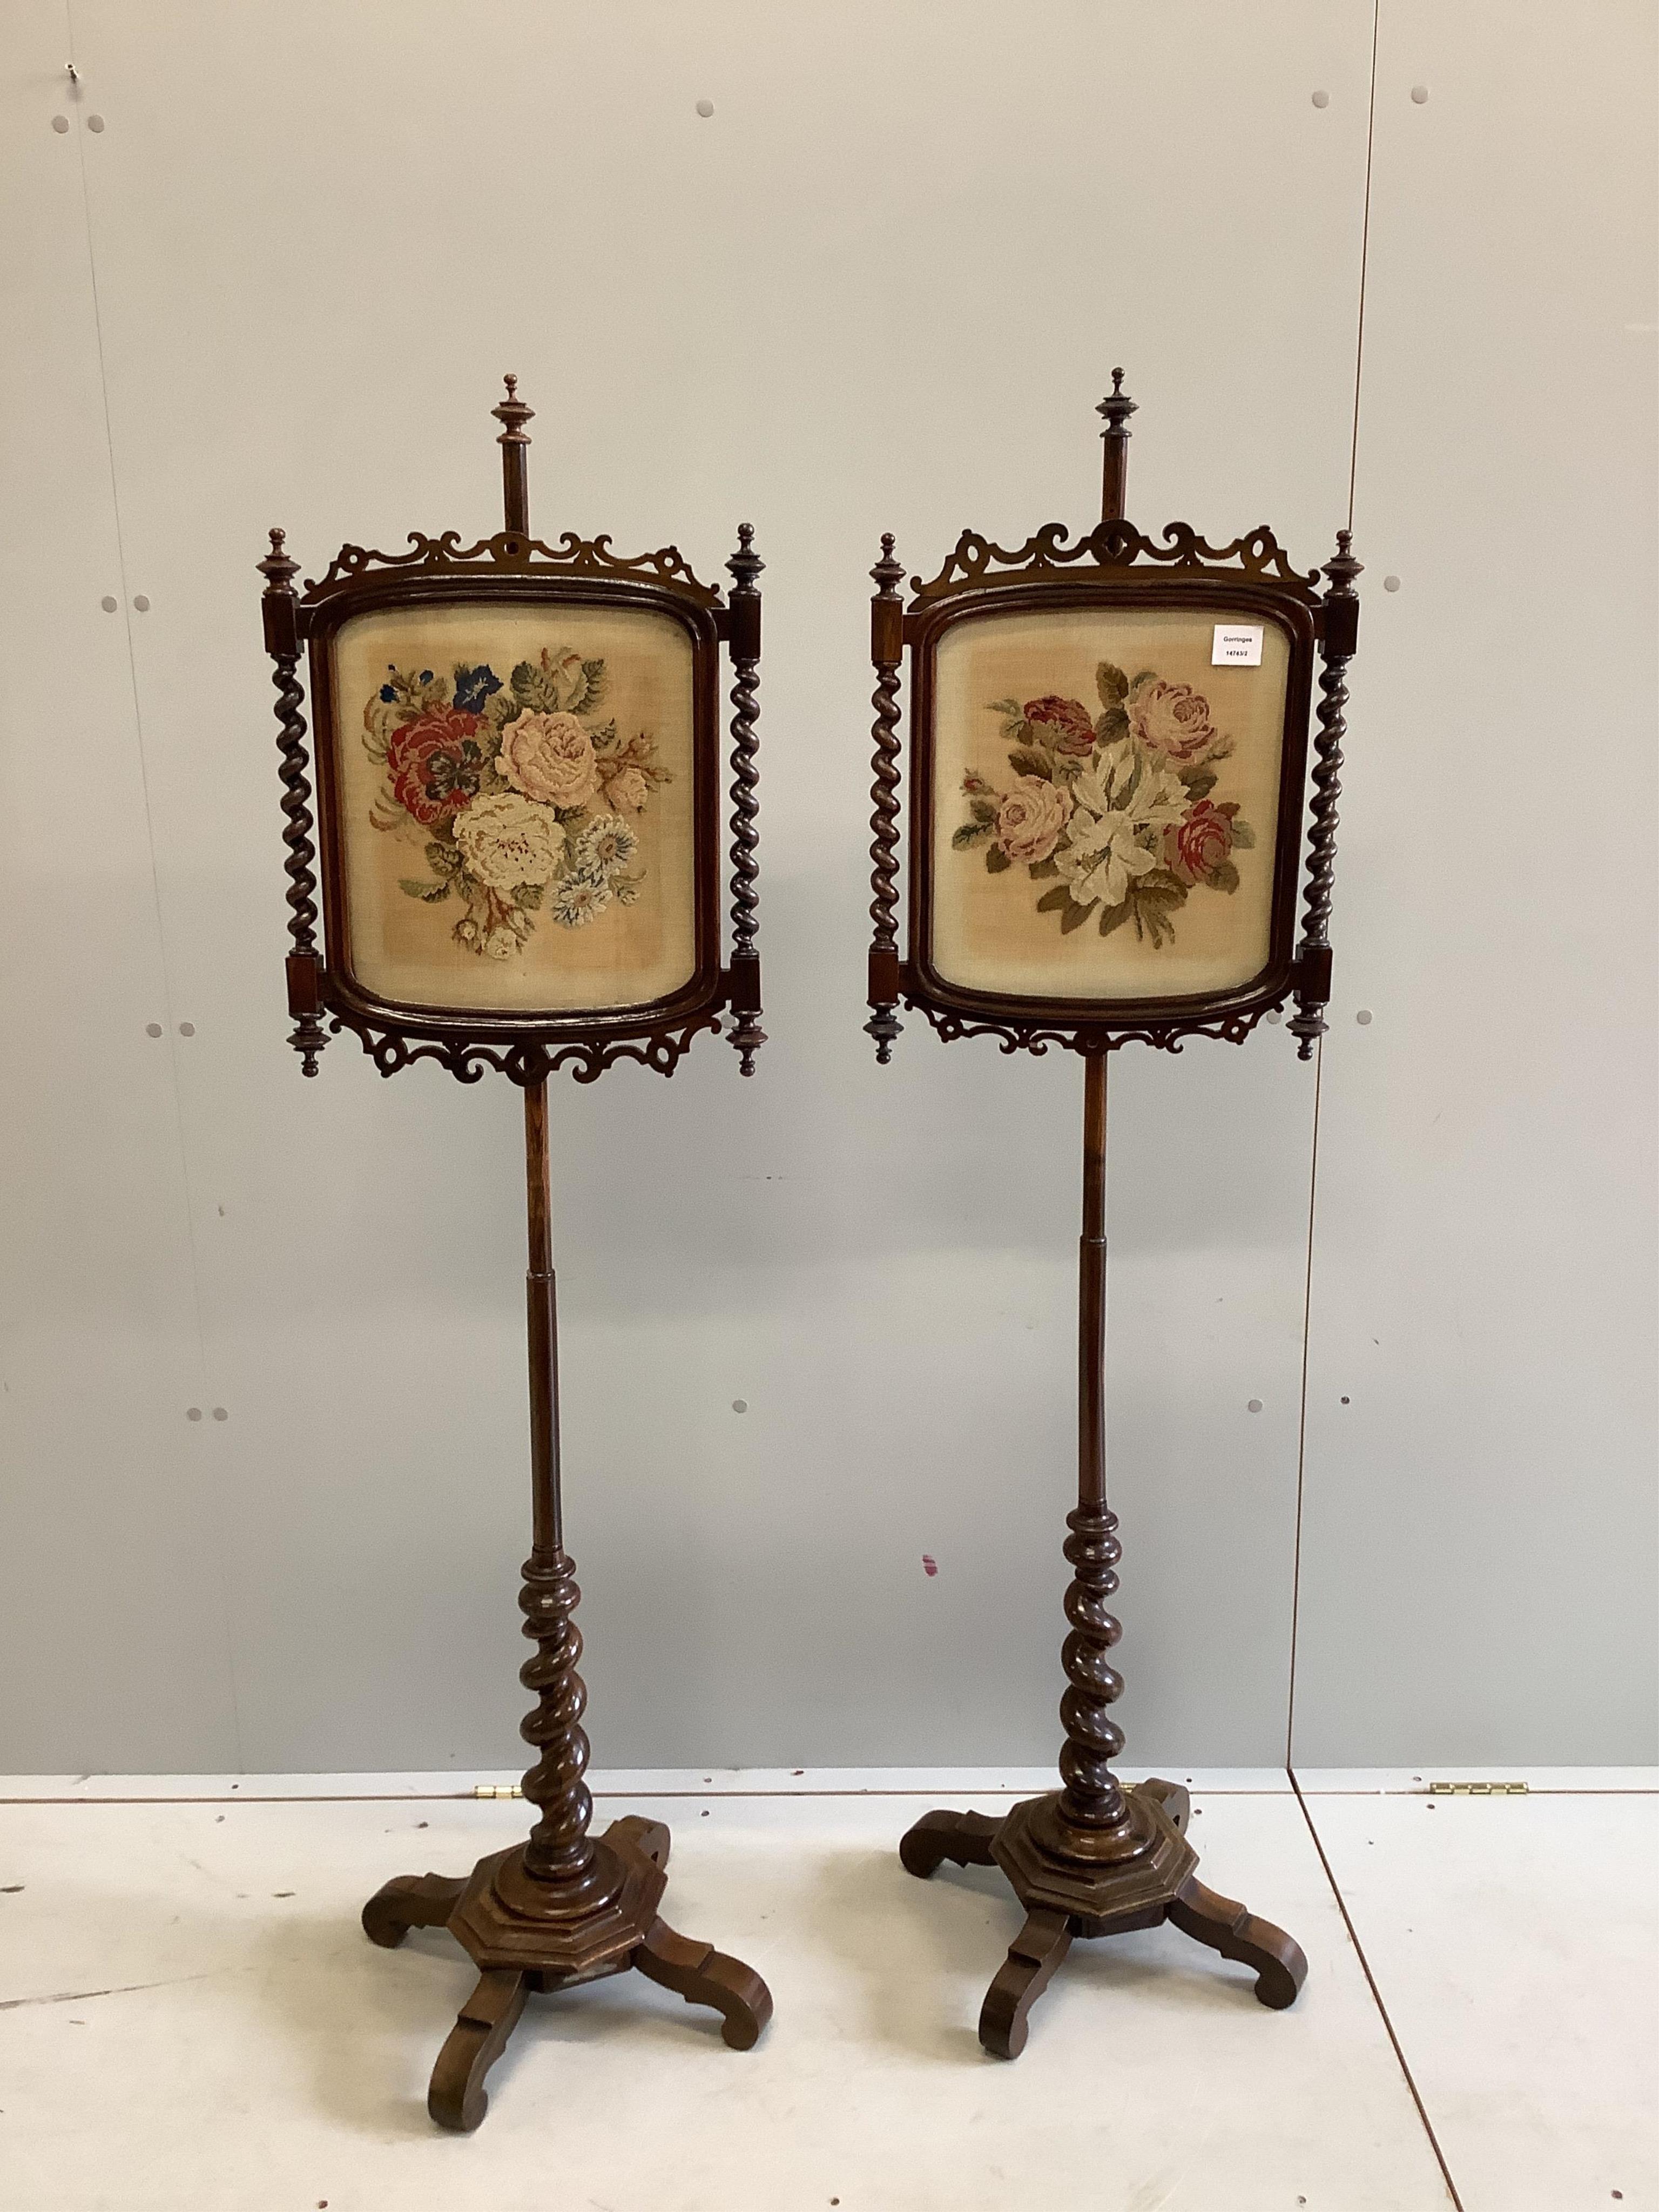 A pair of Victorian rosewood pole screens with floral tapestry banners, height 150cm. Condition - fair